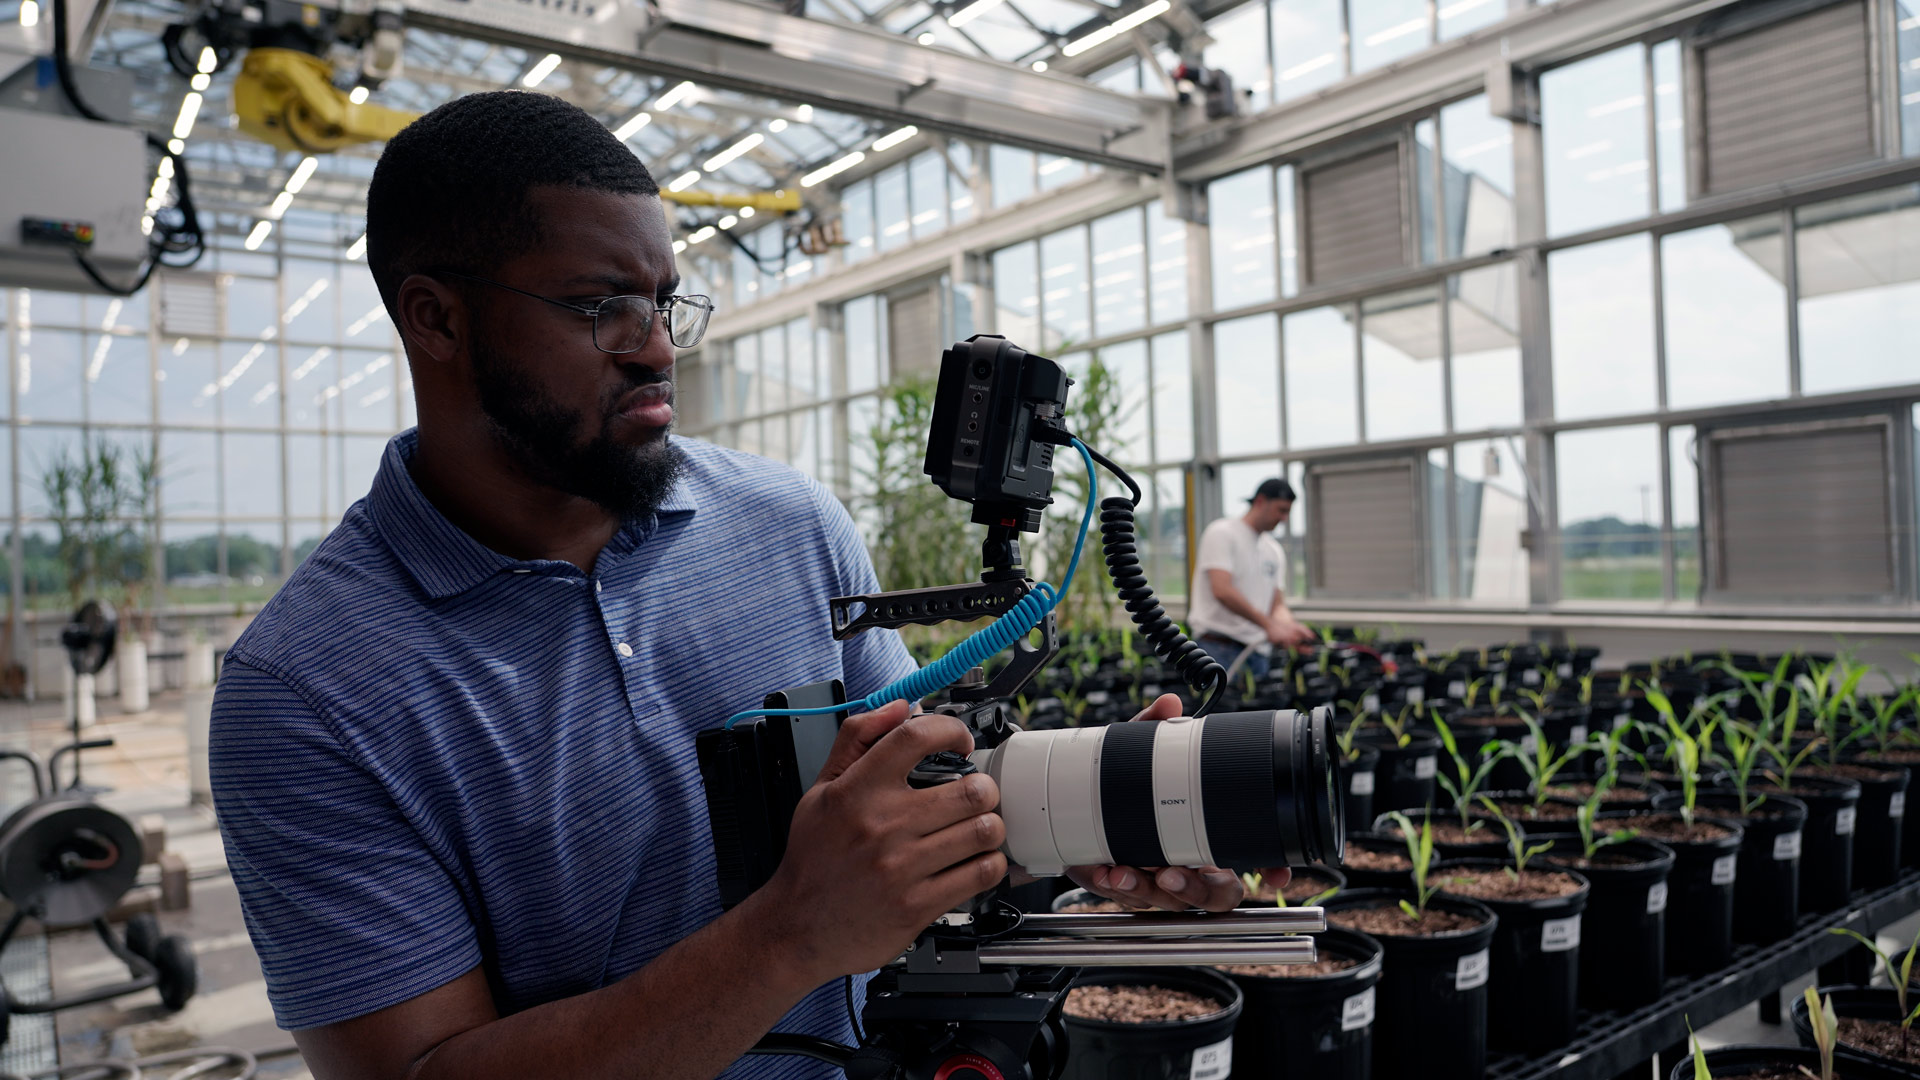 A crew member films plants at a greenhouse.